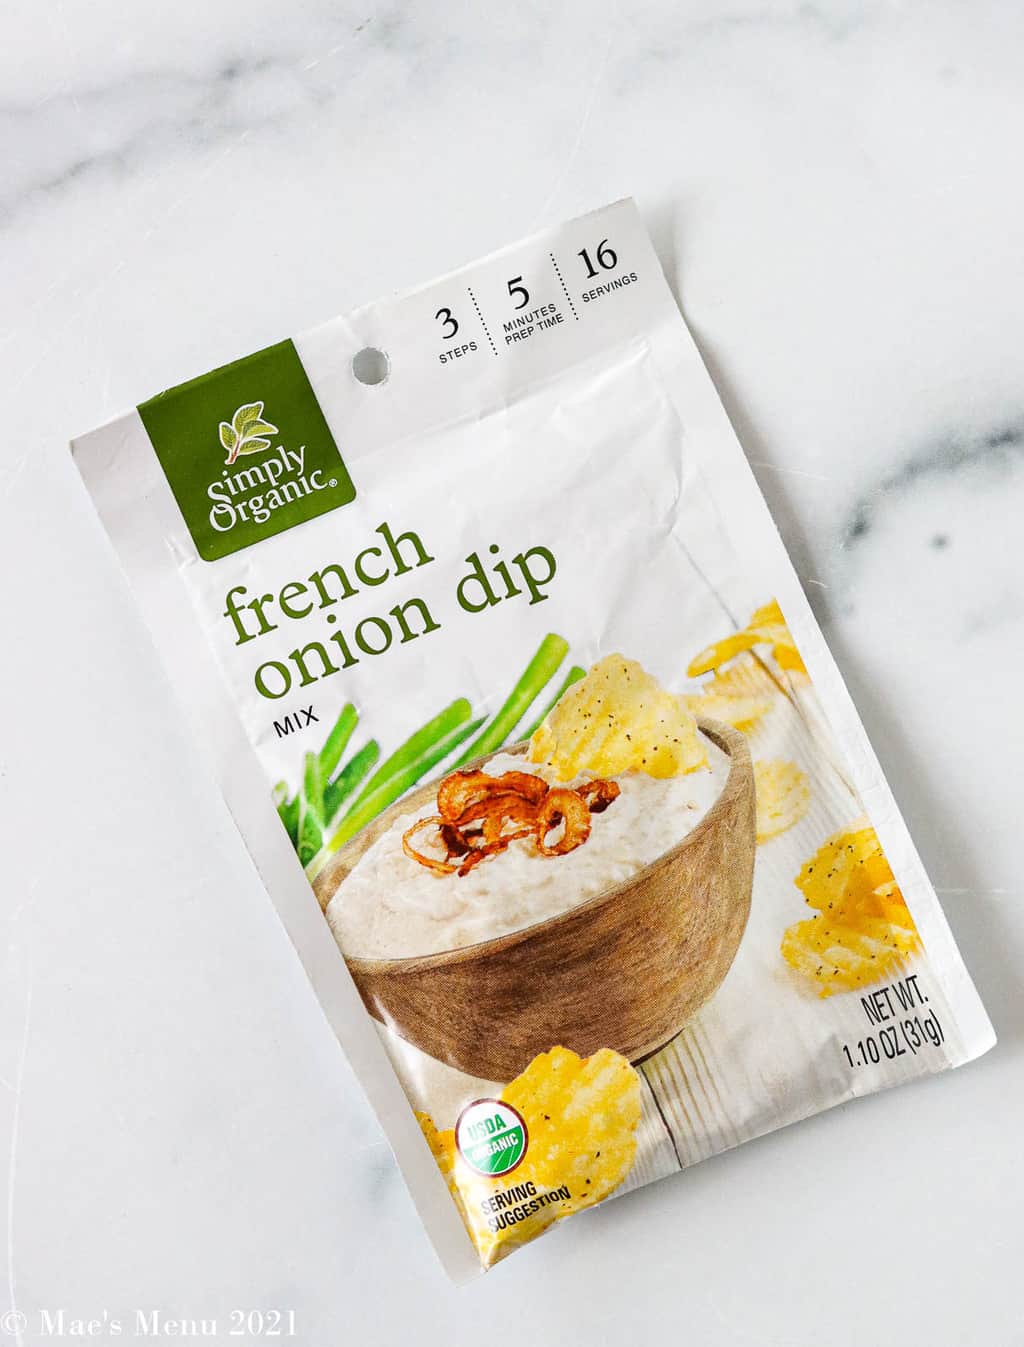 A packet of french onion dip mix